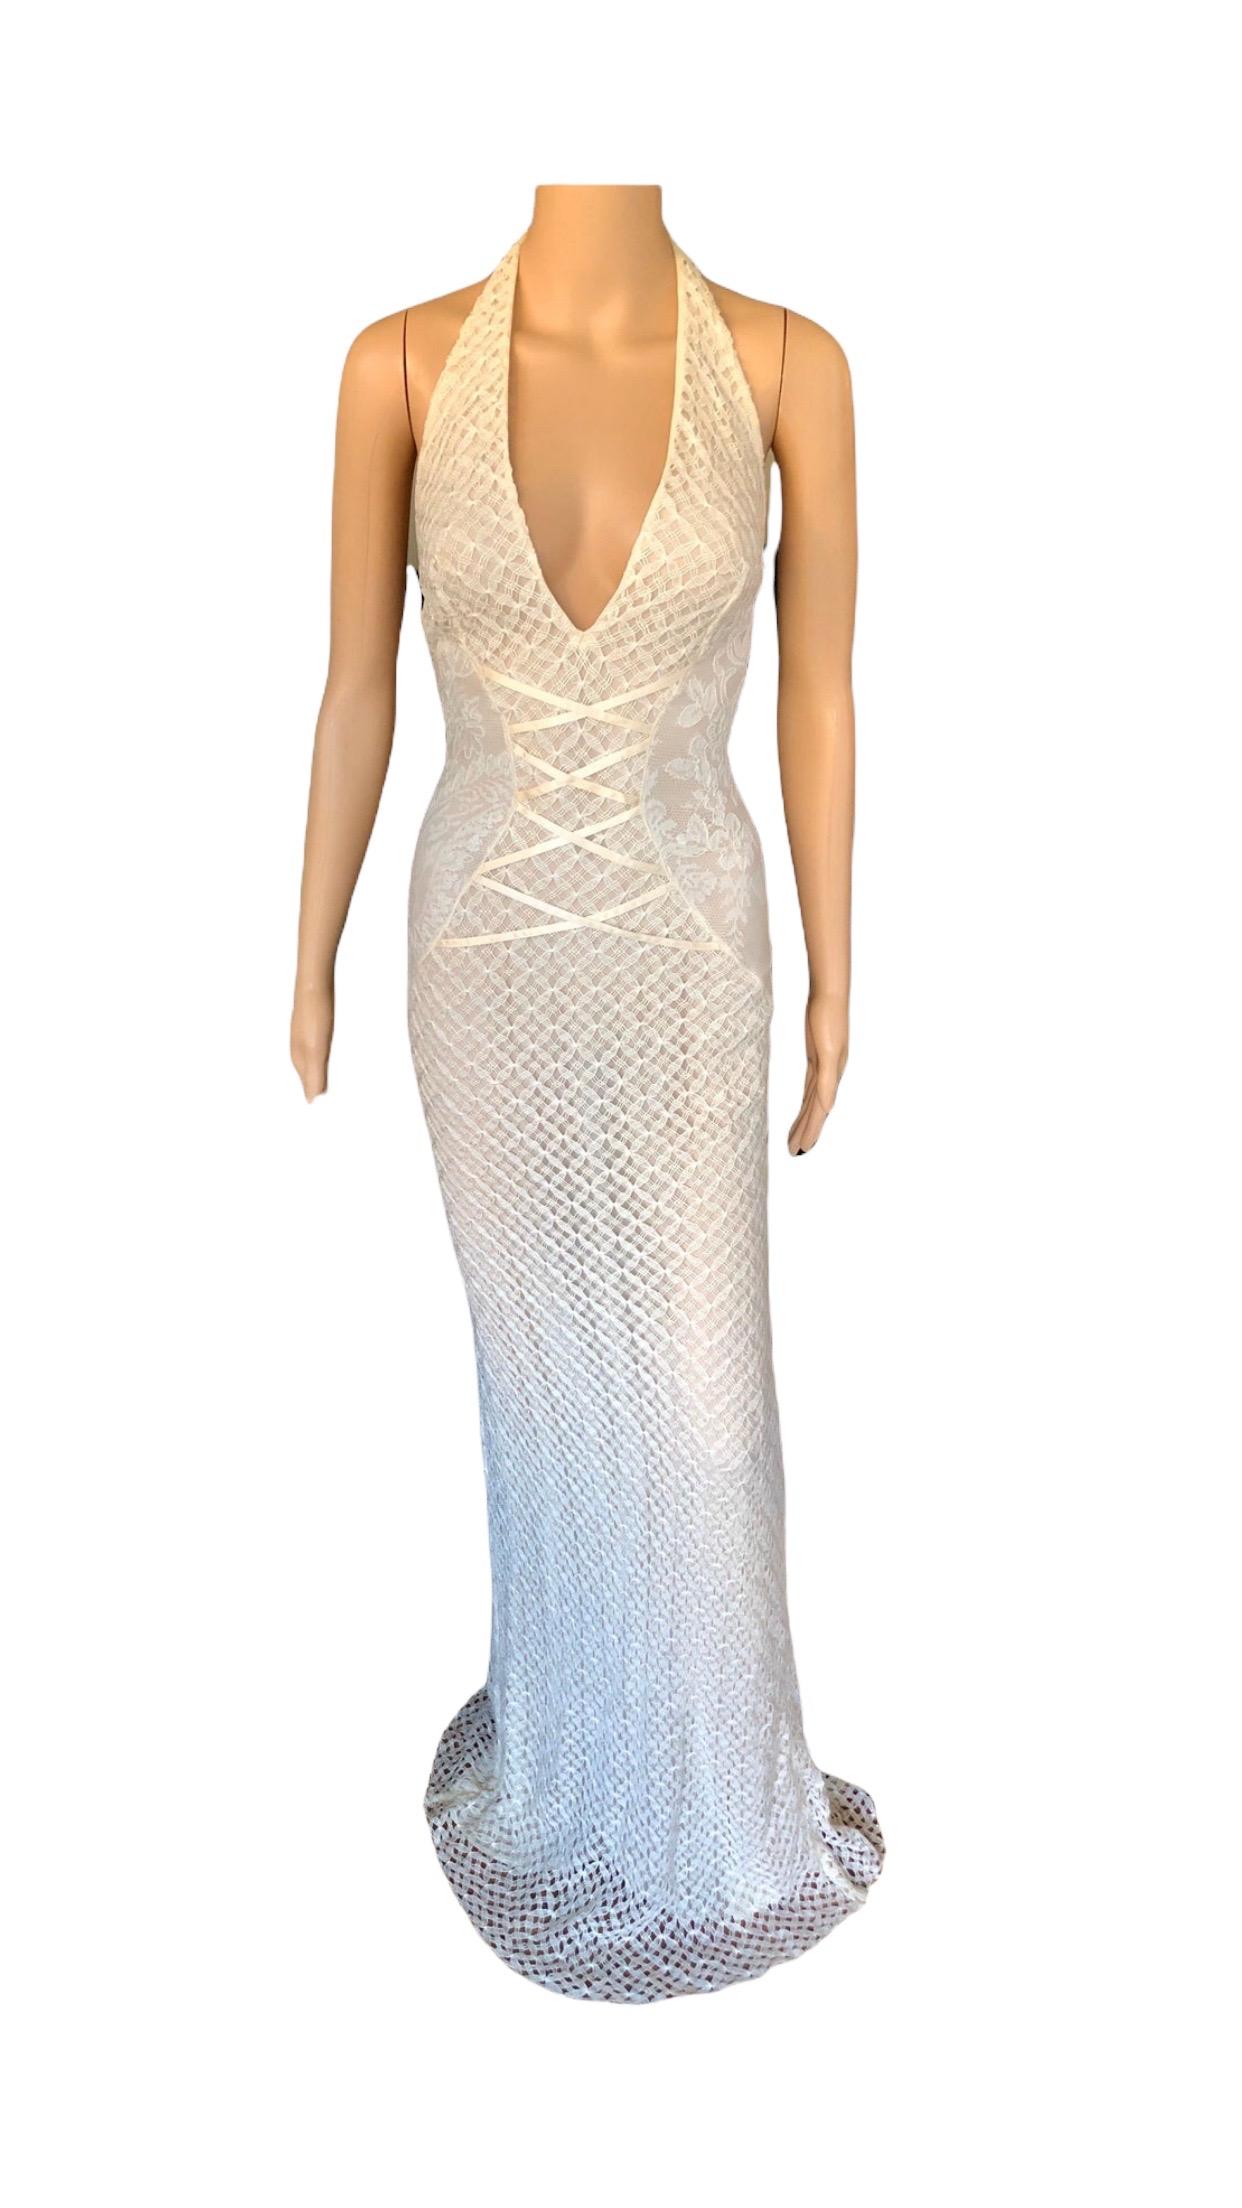 NWT Gianni Versace S/S 2002 Plunging Backless Semi Sheer Lace Ivory Dress Gown 6